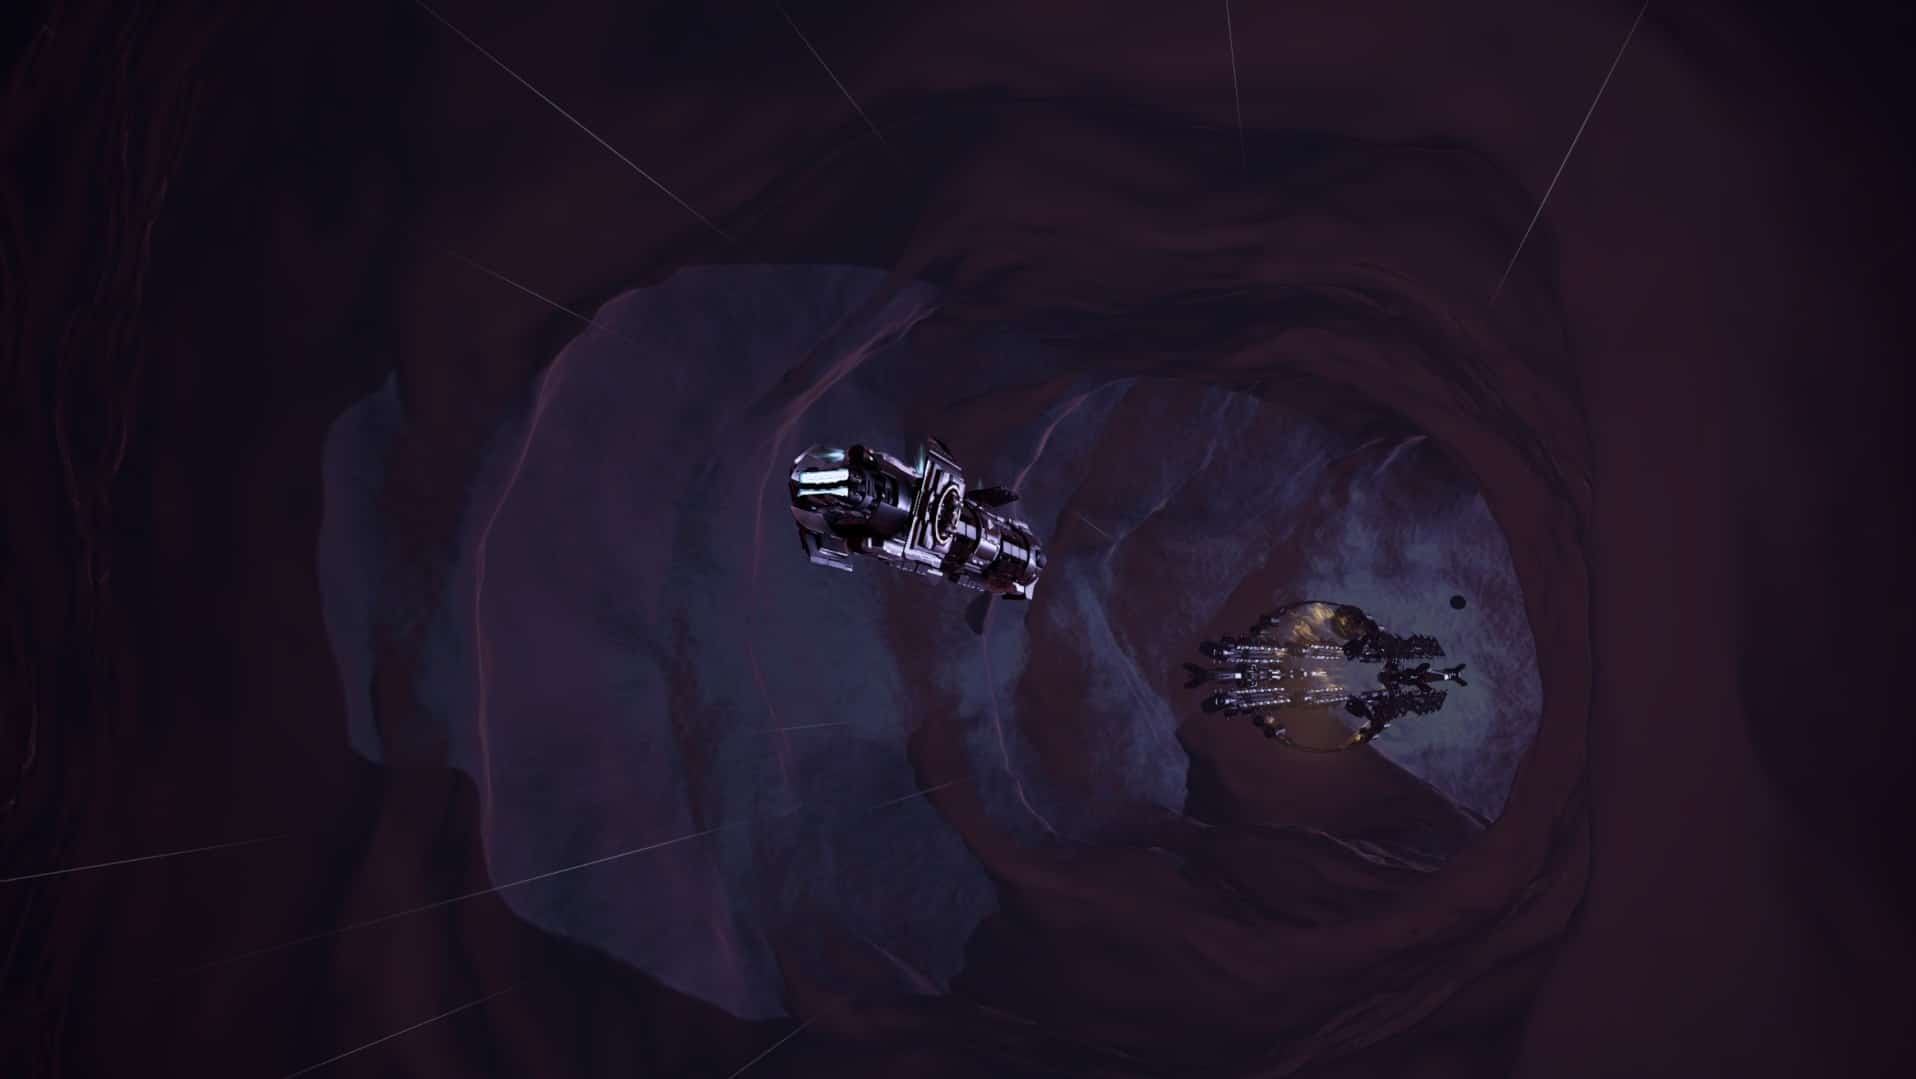 Windfall is completely surrounded by a kind of ... cave. Or is it the maw of a space monster after all? Either way, it's big enough to hold entire planets and stars.